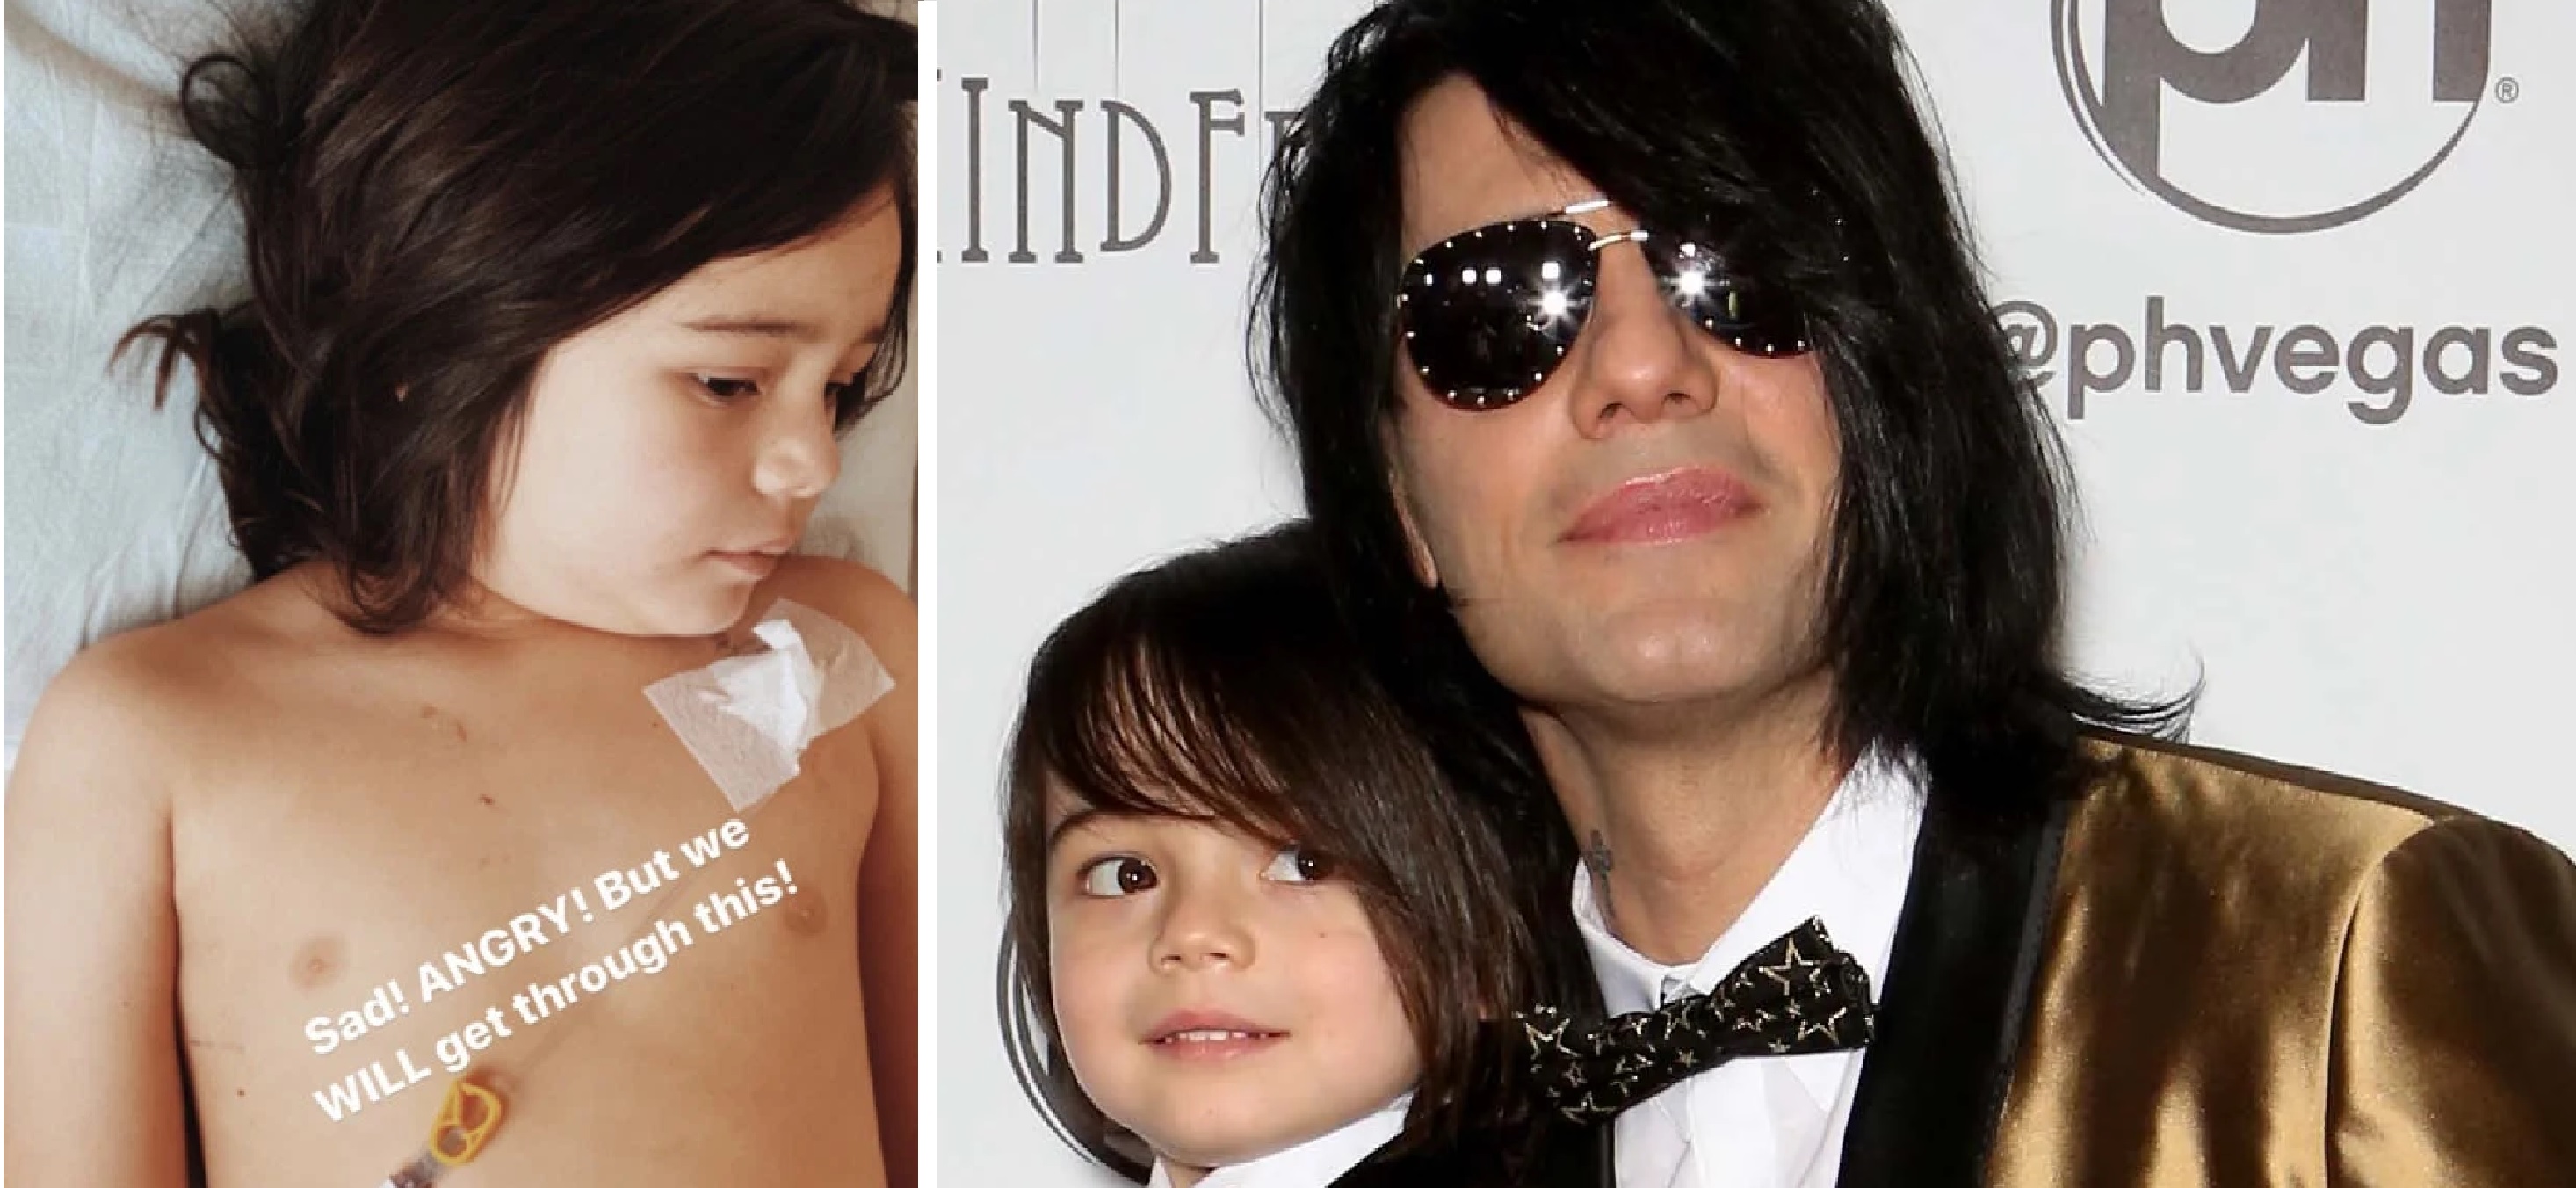 Criss Angel’s 5 YO Son is Back to Hospital for Chemotherapy for Relapsed Cancer!